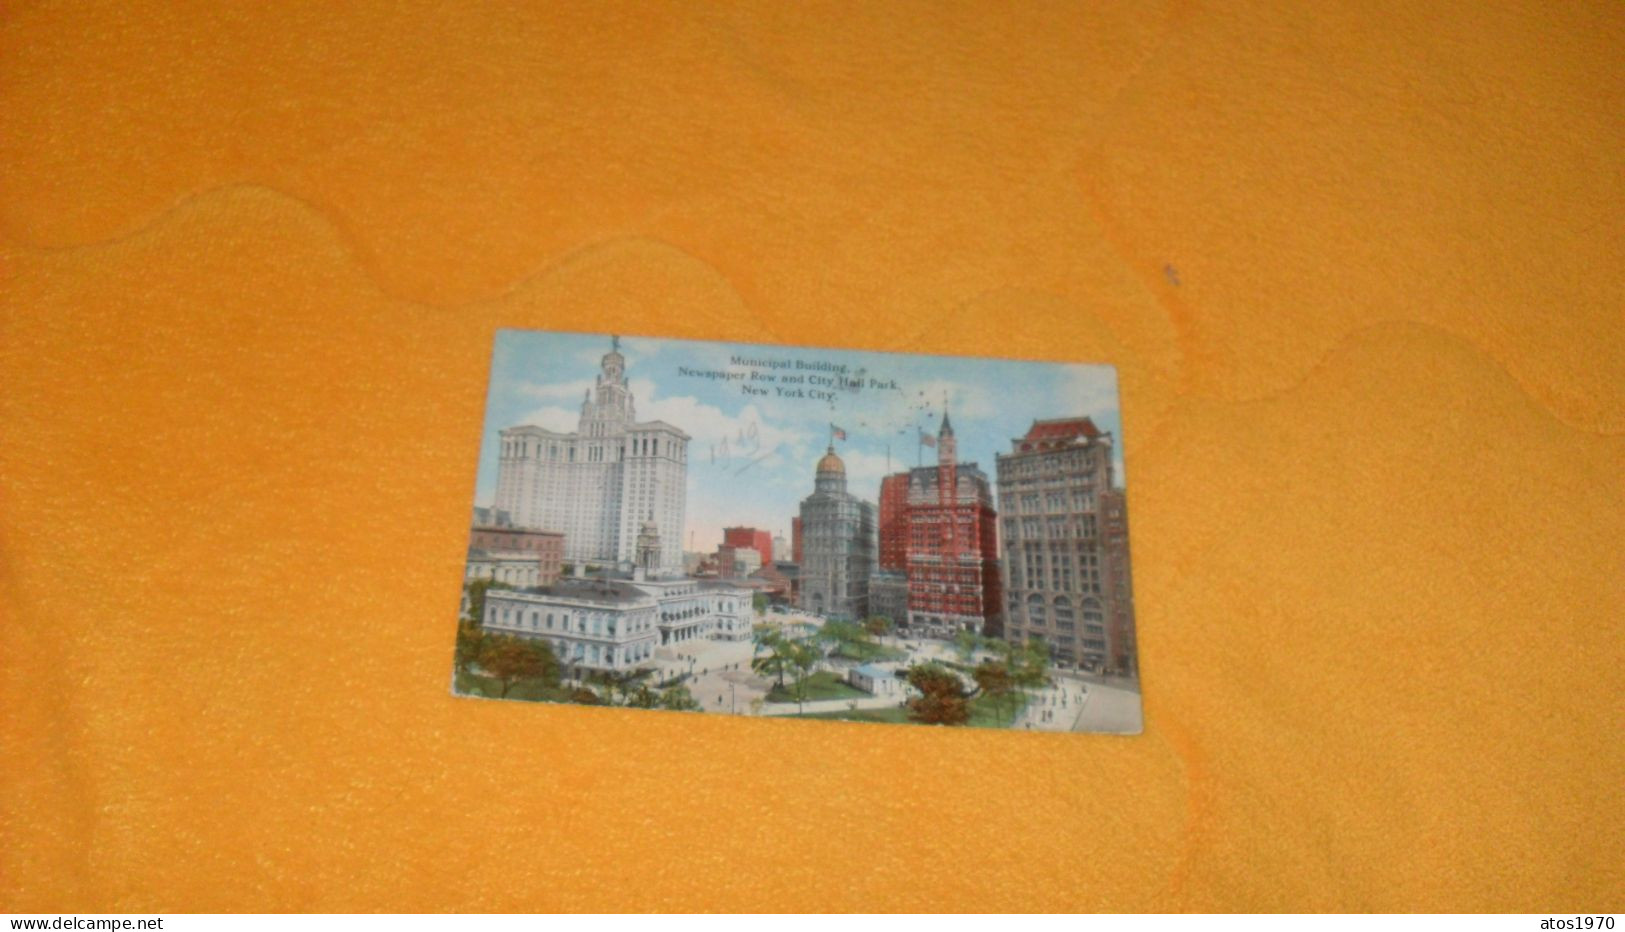 CARTE POSTALE ANCIENNE CIRCULE DE 1919../ MUNICIPAL BUILDING. NEWSPAPER ROW AND CITY HALL PARK..NEW YORK CITY + TIMBRES - Other Monuments & Buildings